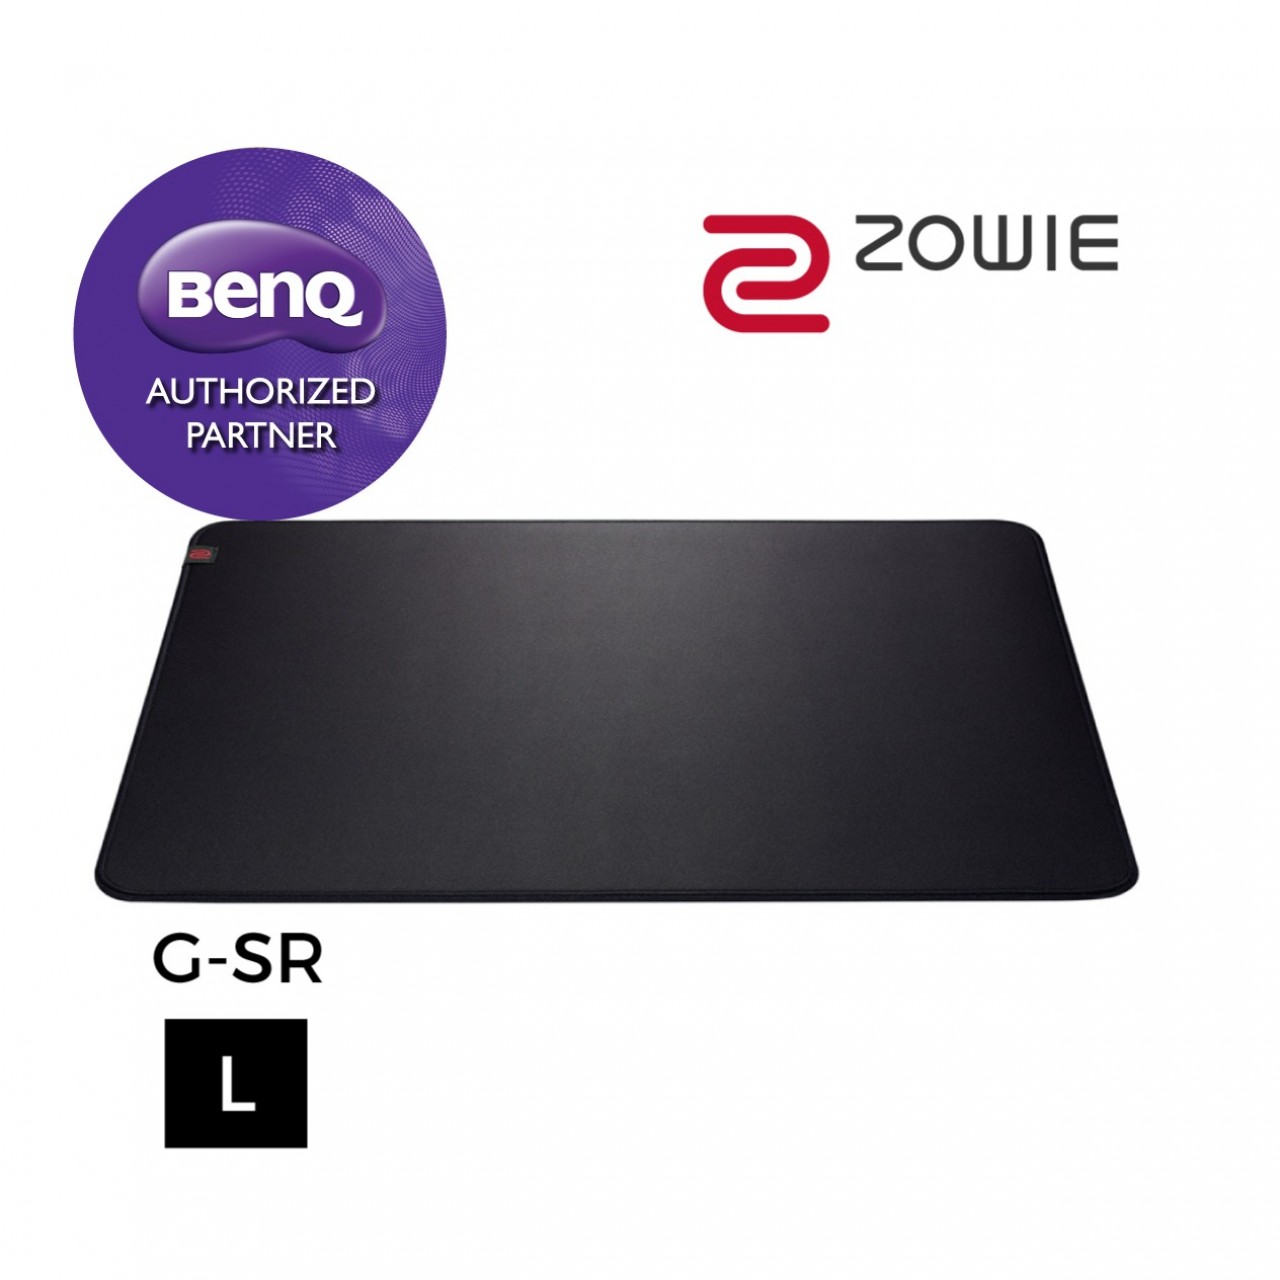 17.BenQ Sports Gaming Mouse pad ZOWIE G-SR – 3.5 mm Thick – Rubber Base - Black